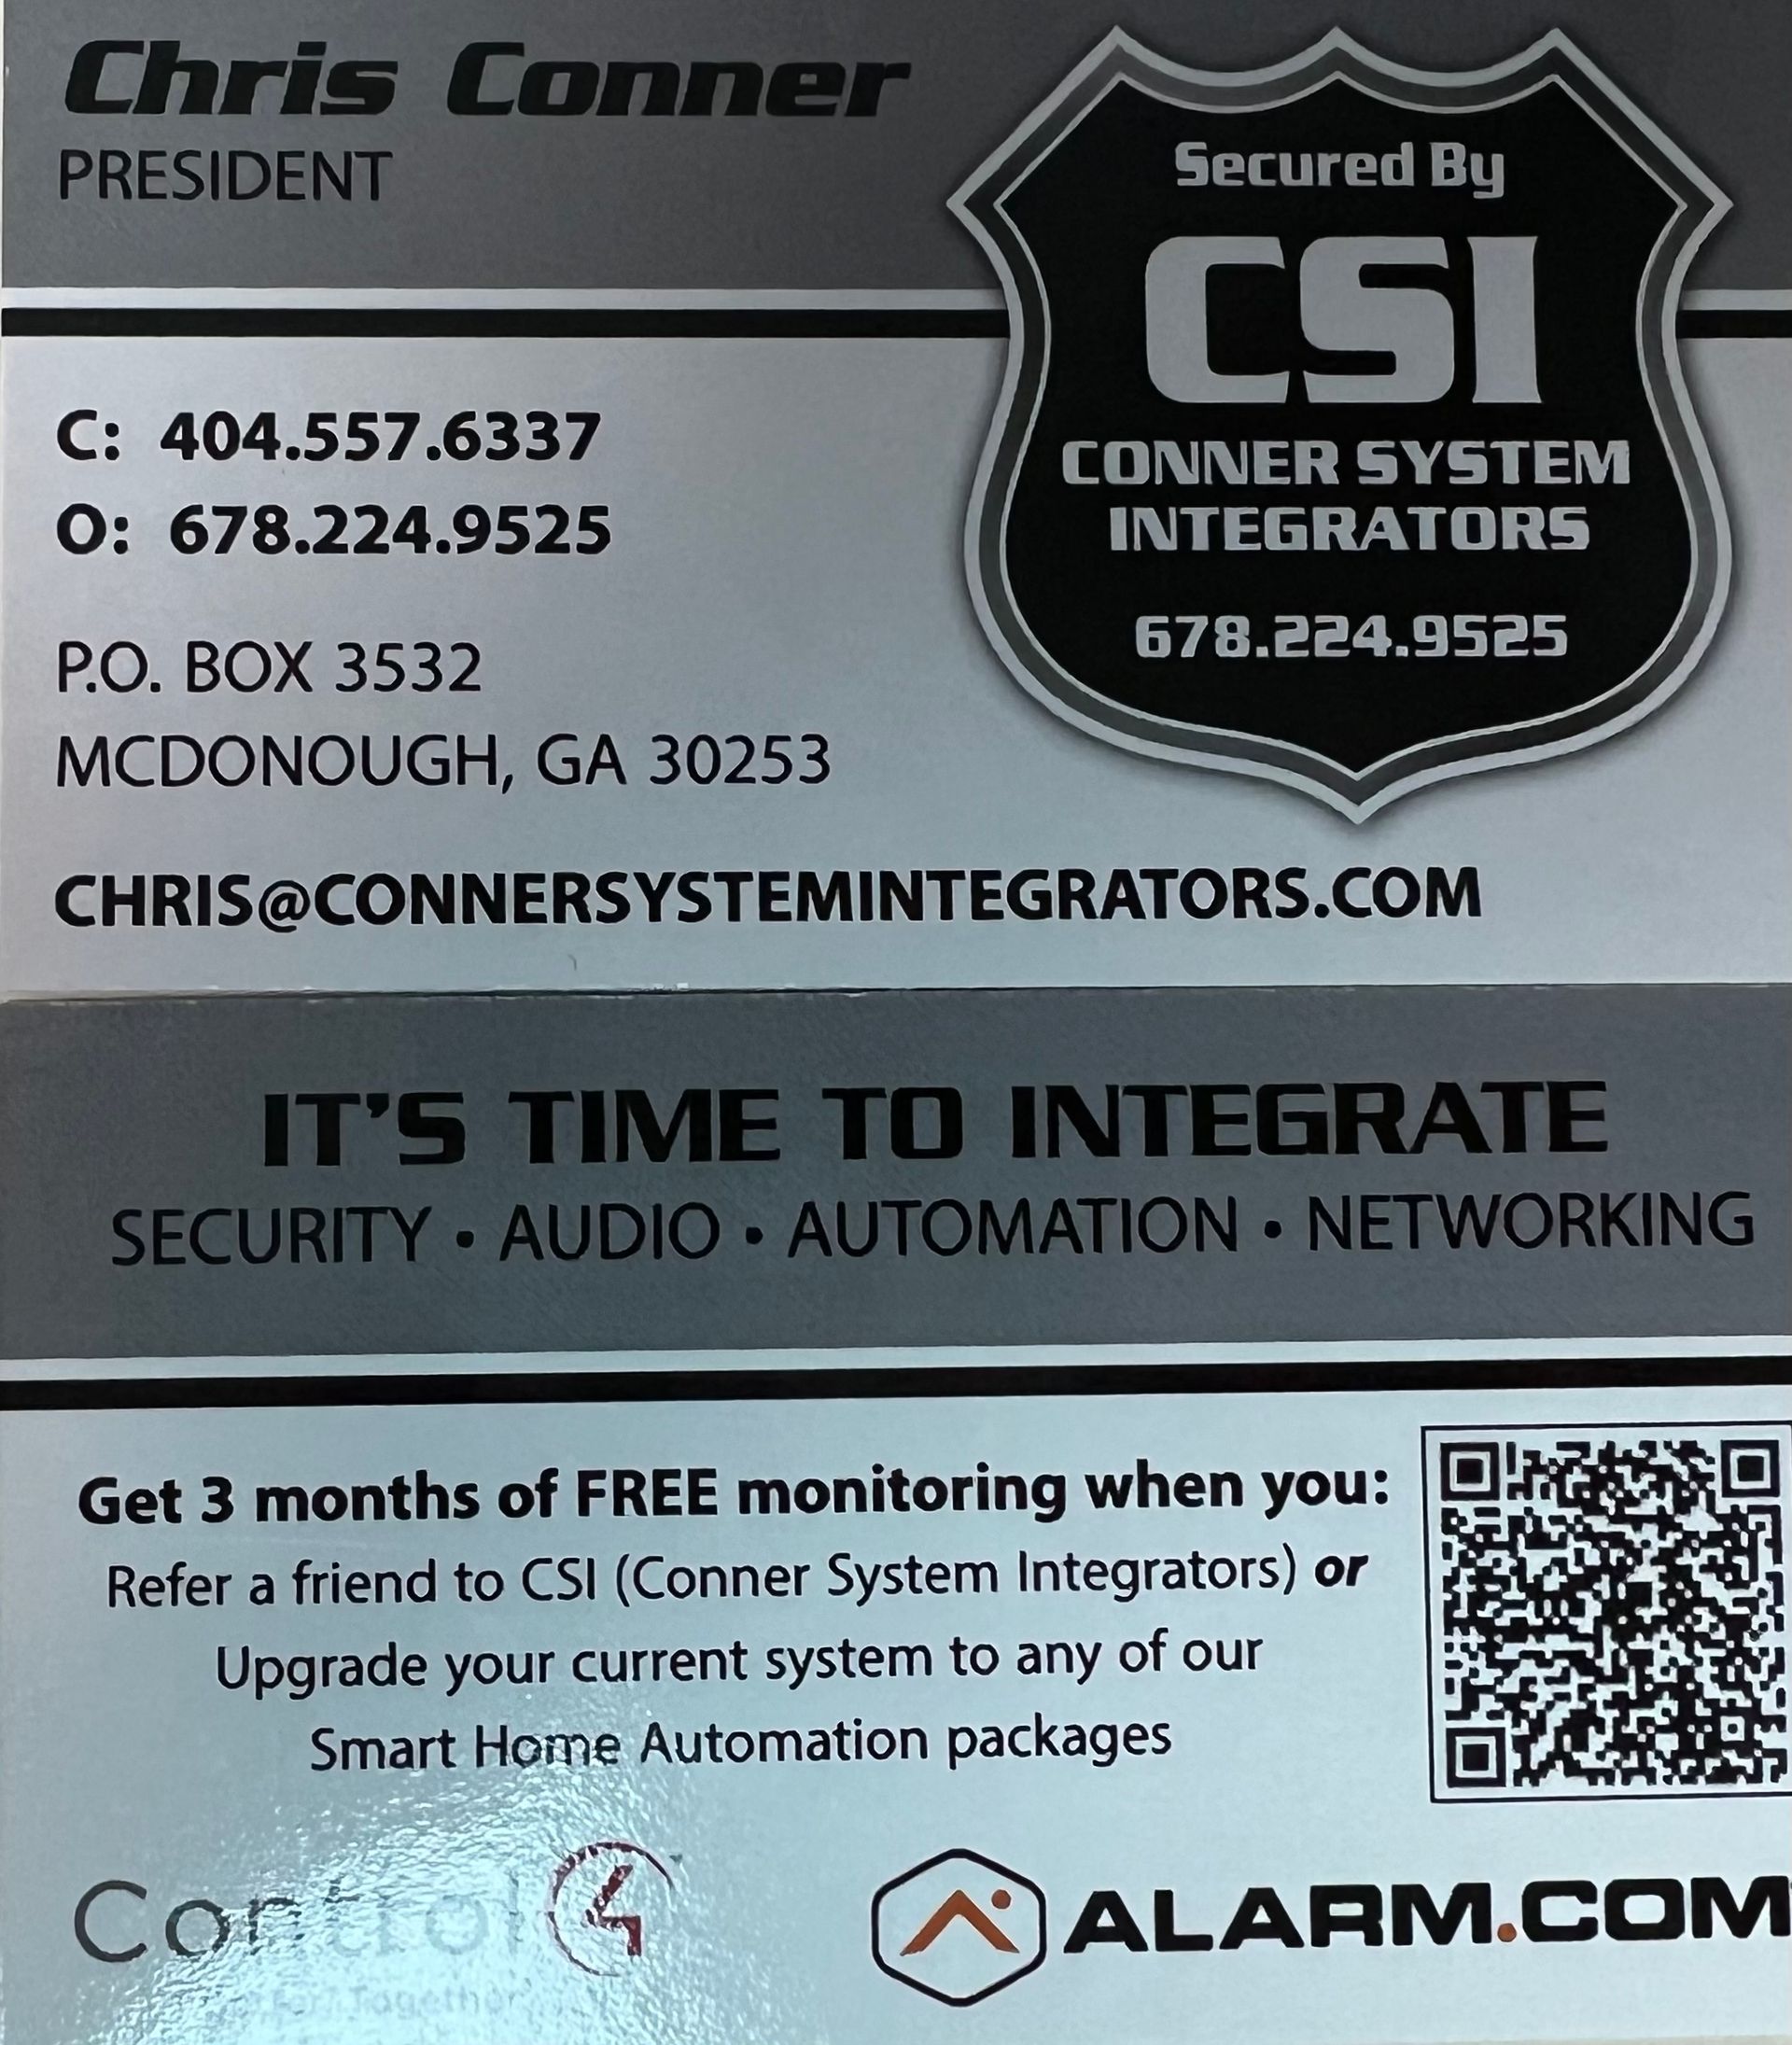 a business card for chris conner says it 's time to integrate security audio automation and networking